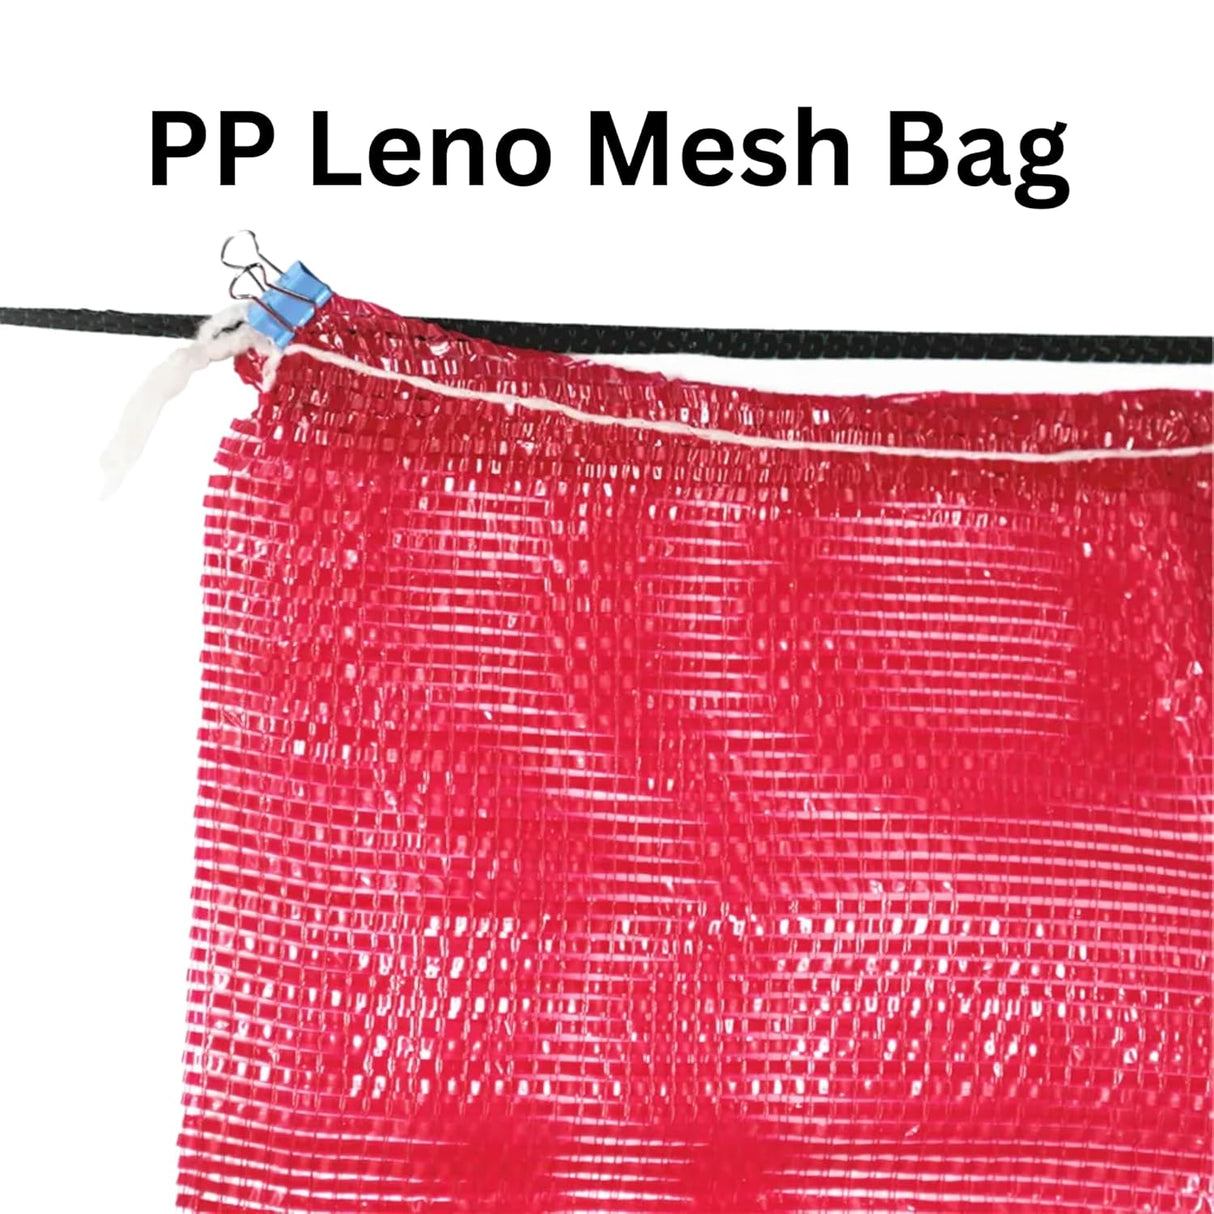 SINGHAL Leno Mesh Storage Produce Bags Reusable for Vegetable Storage Bags Onion Storage Washable Net Bags (16x32 Inch - Yellow, 25)